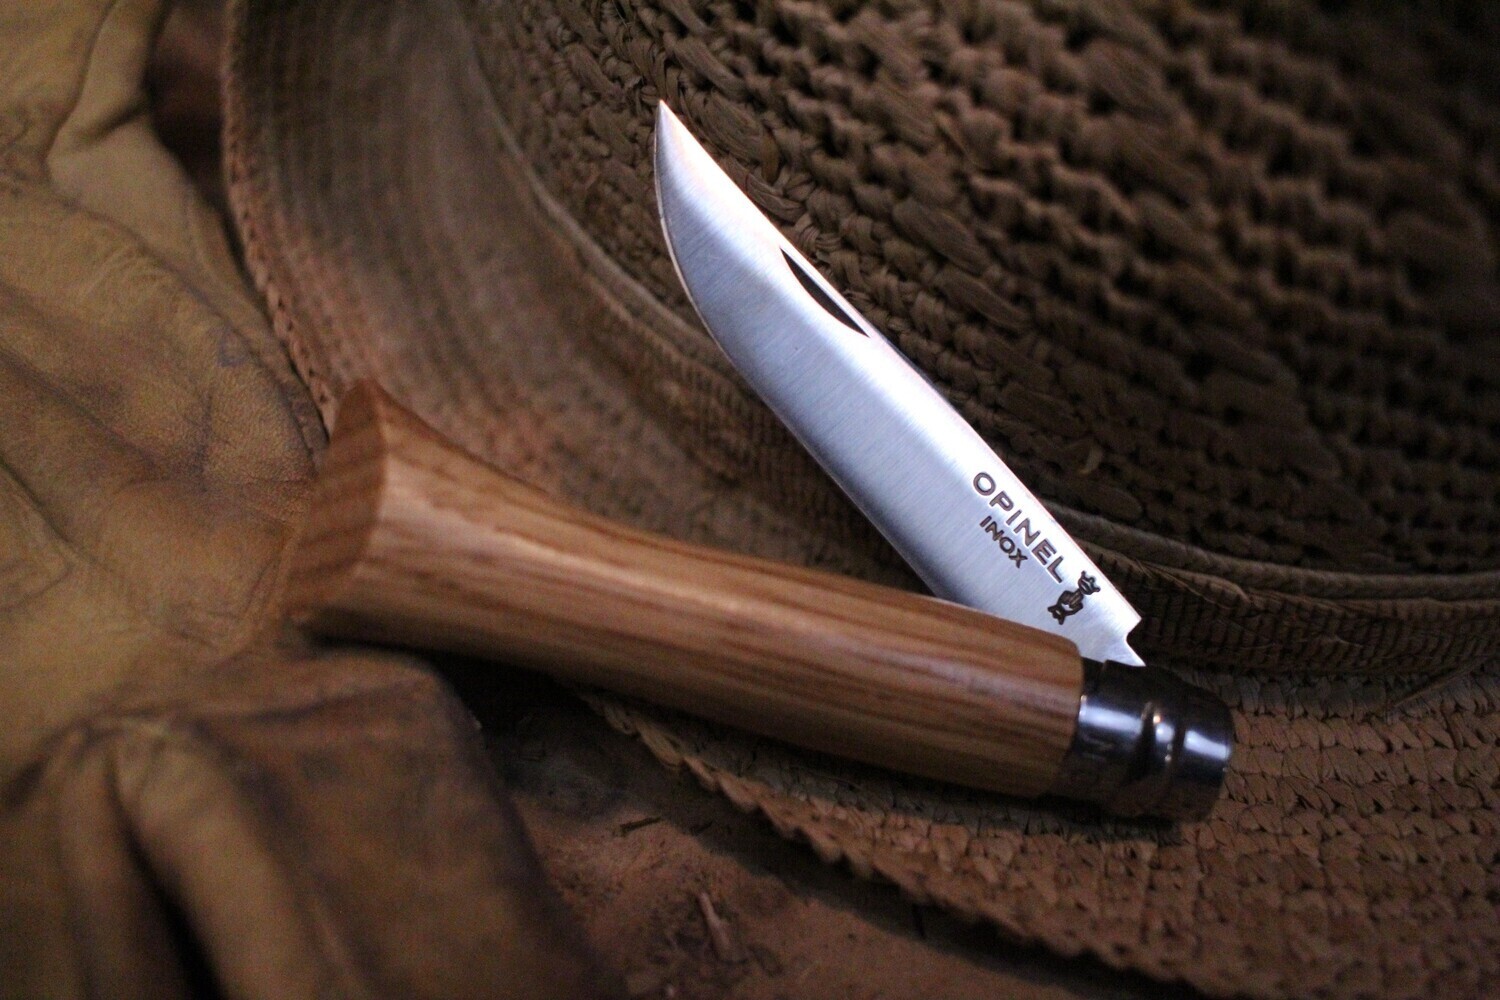 Opinel No. 6 2.75" Knife, Oak / Satin Stainless